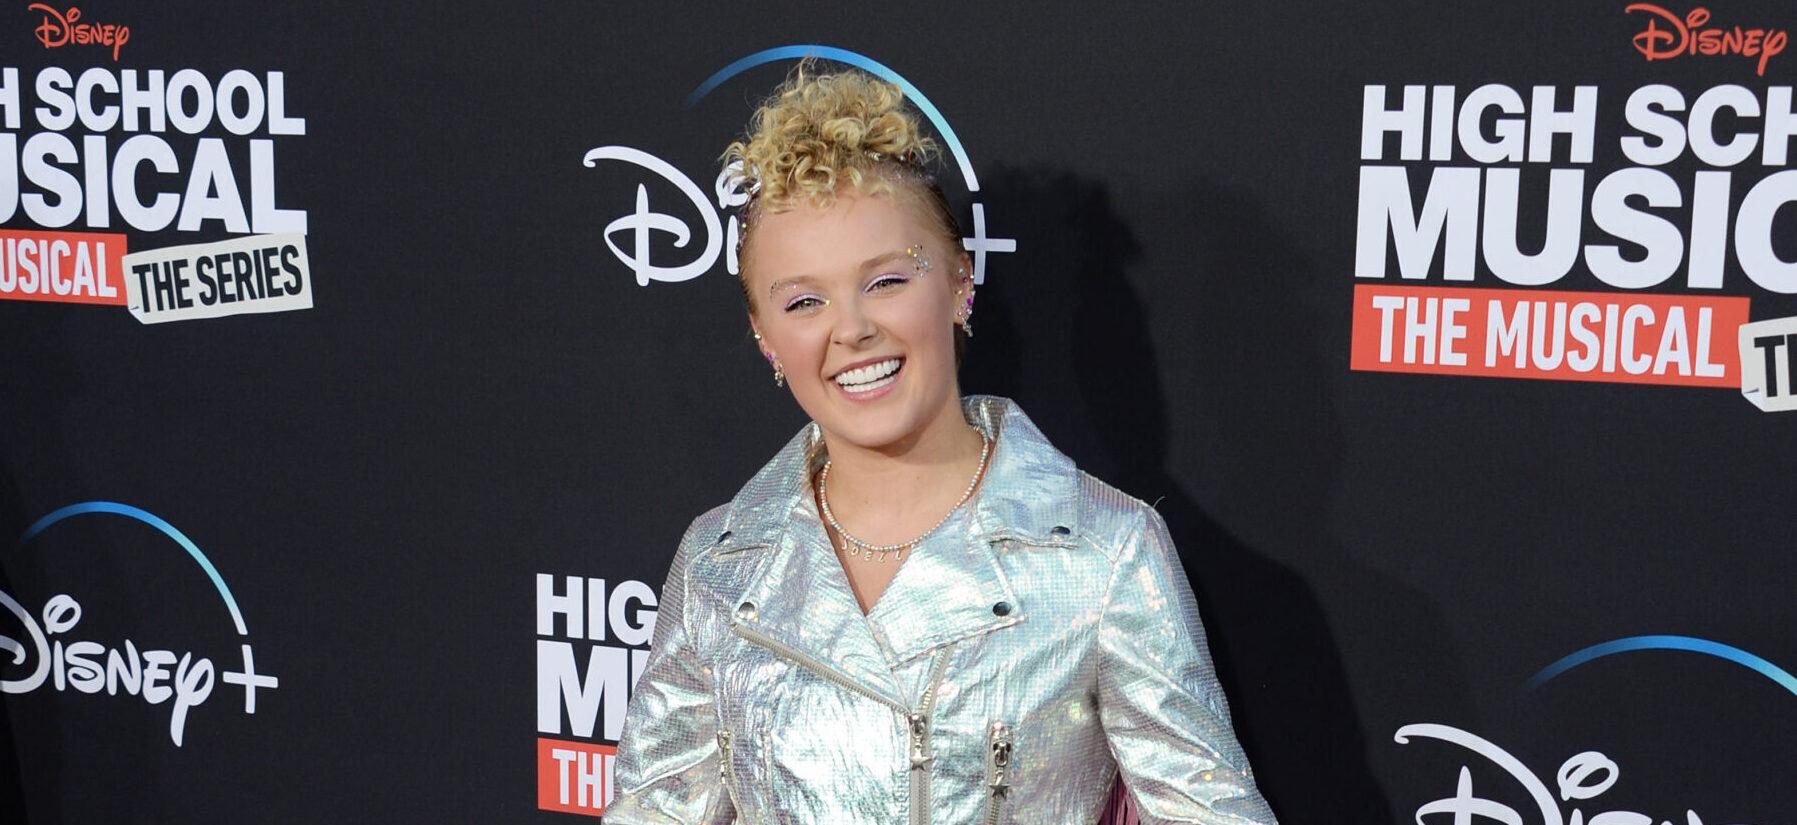 JoJo Siwa Confirms She Is In Her Single Era With Hilarious Clip Of Her Being ‘The 7th Wheel’